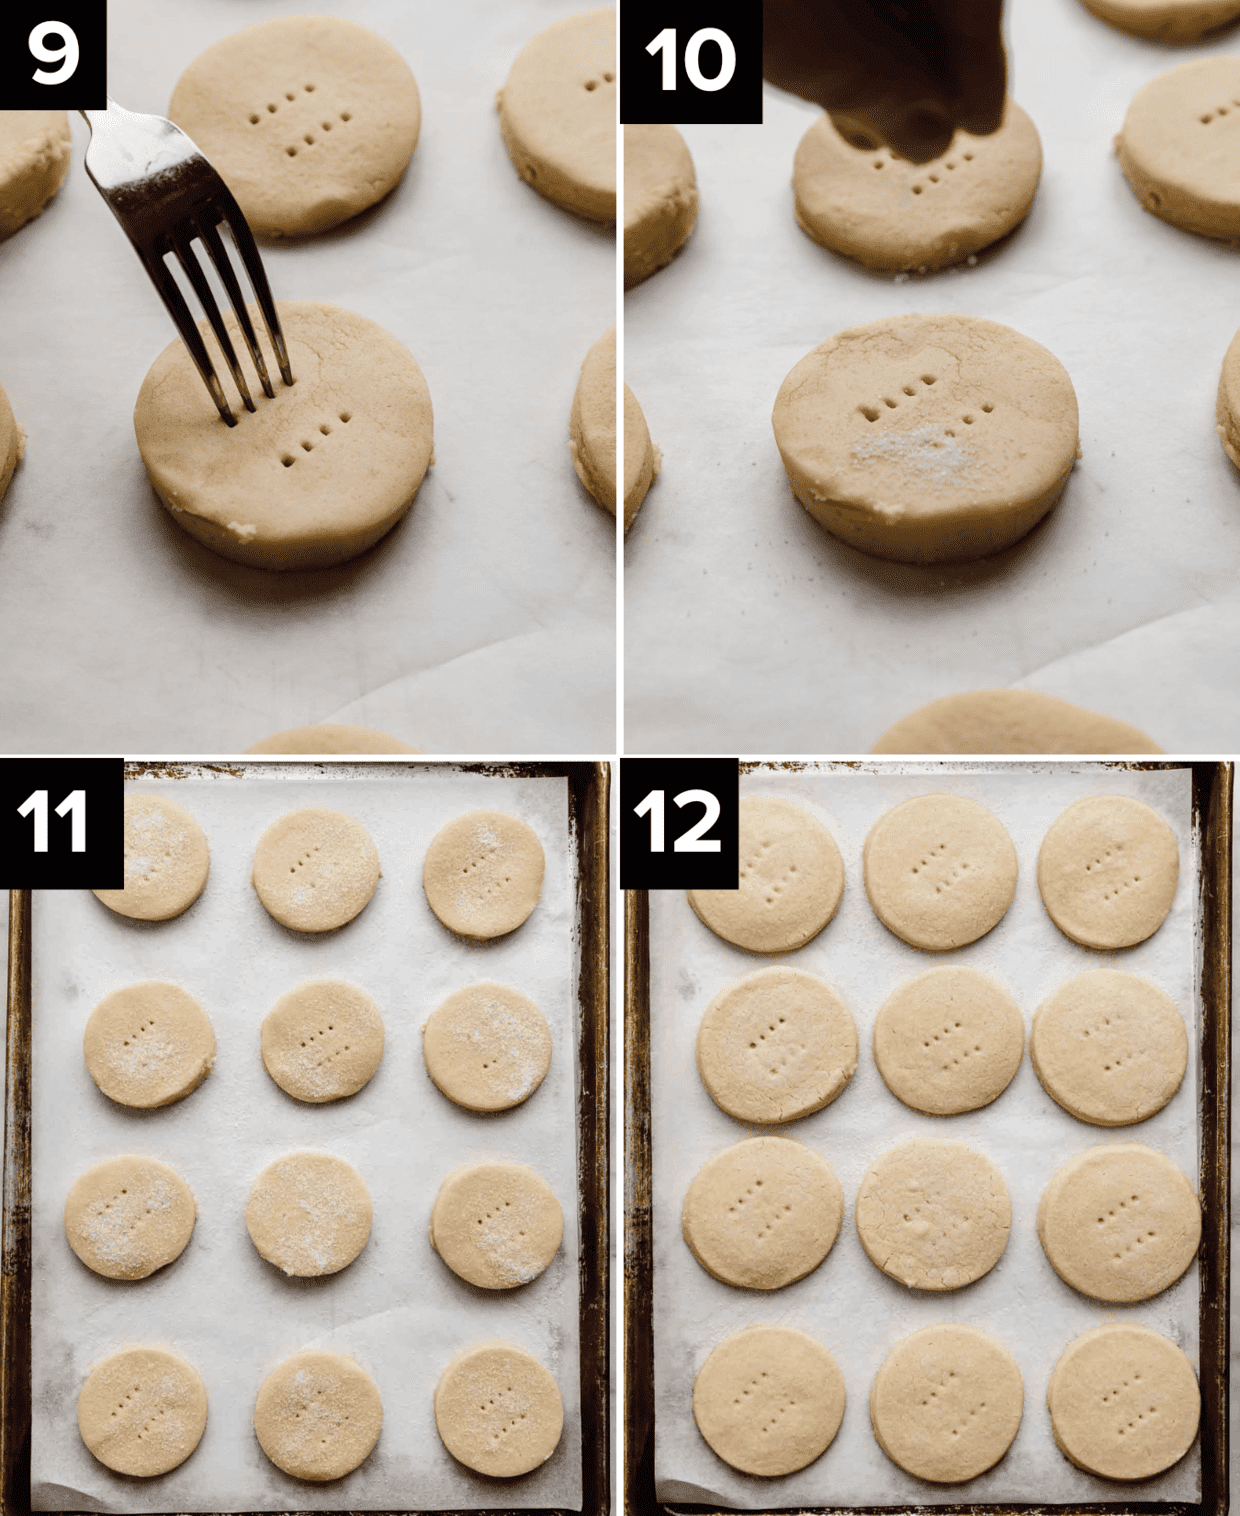 Four photos showing the making of Grandma's Shortbread Cookies, top left photo is a fork pressing to a round shortbread cookie, top right is sugar sprinkled overtop, bottom left is shortbread on baking sheet, bottom right is baked shortbread cookies on a baking sheet.